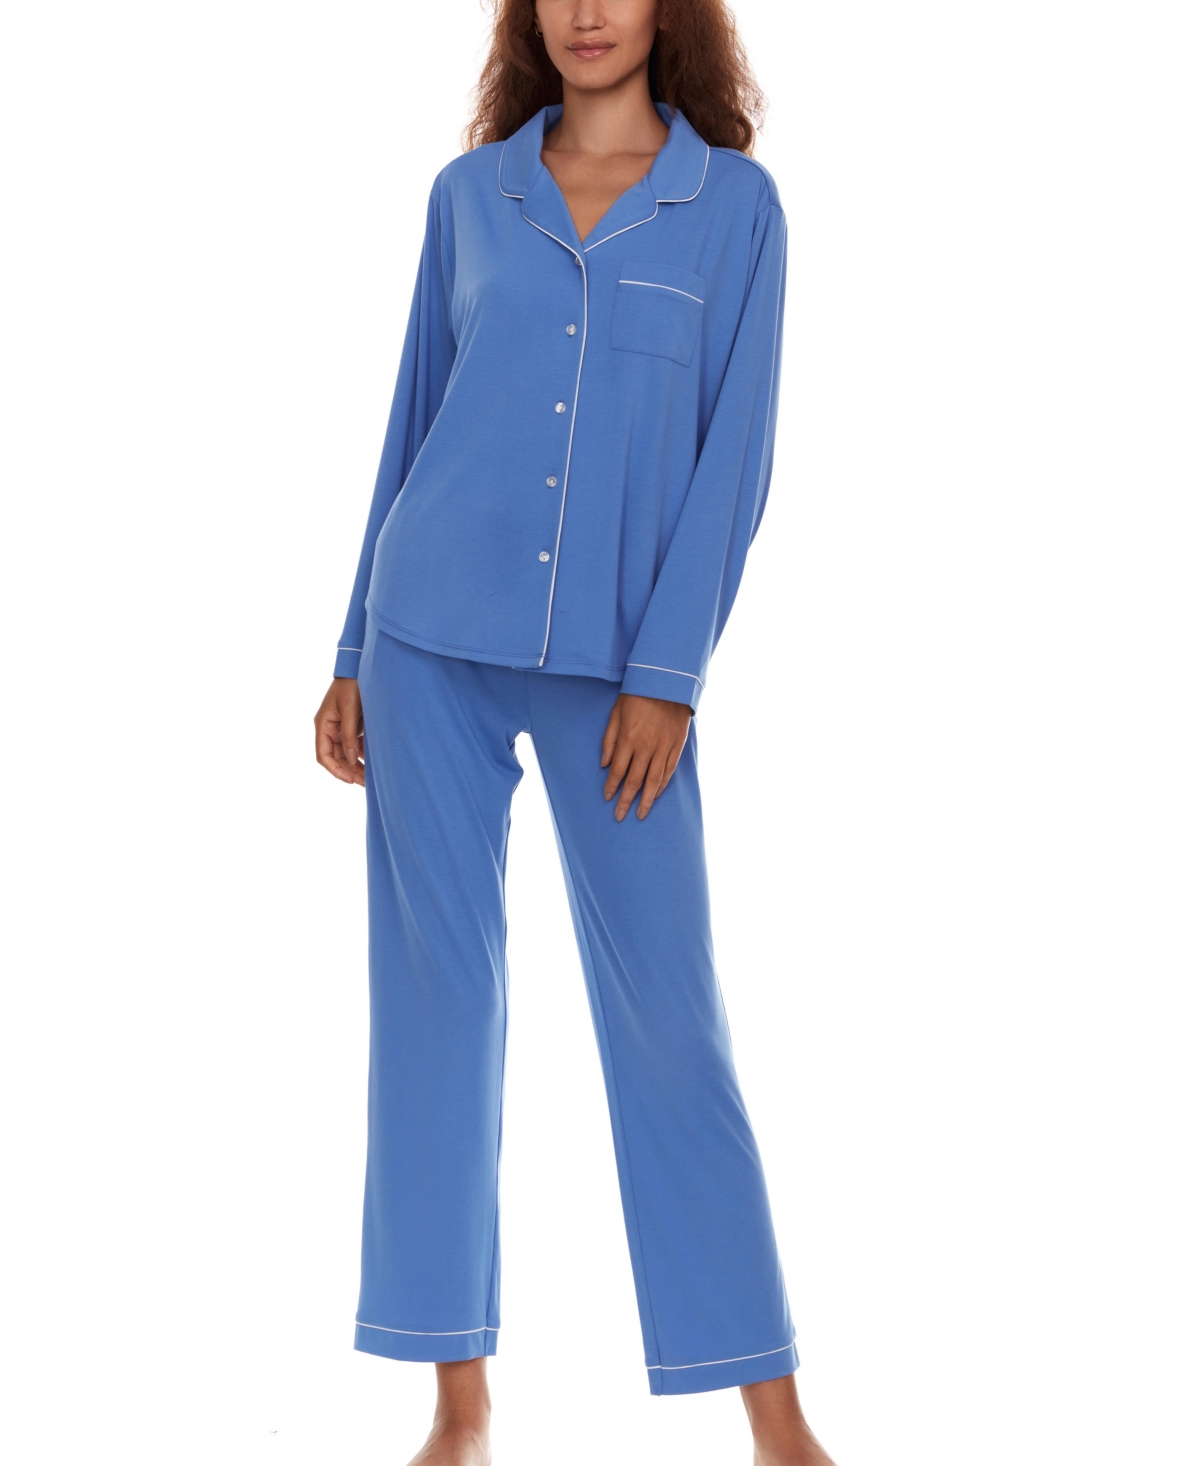 Women's Annie 2 Piece Notch Long Sleeve Top and Knit Pants Pajama Set - Blue